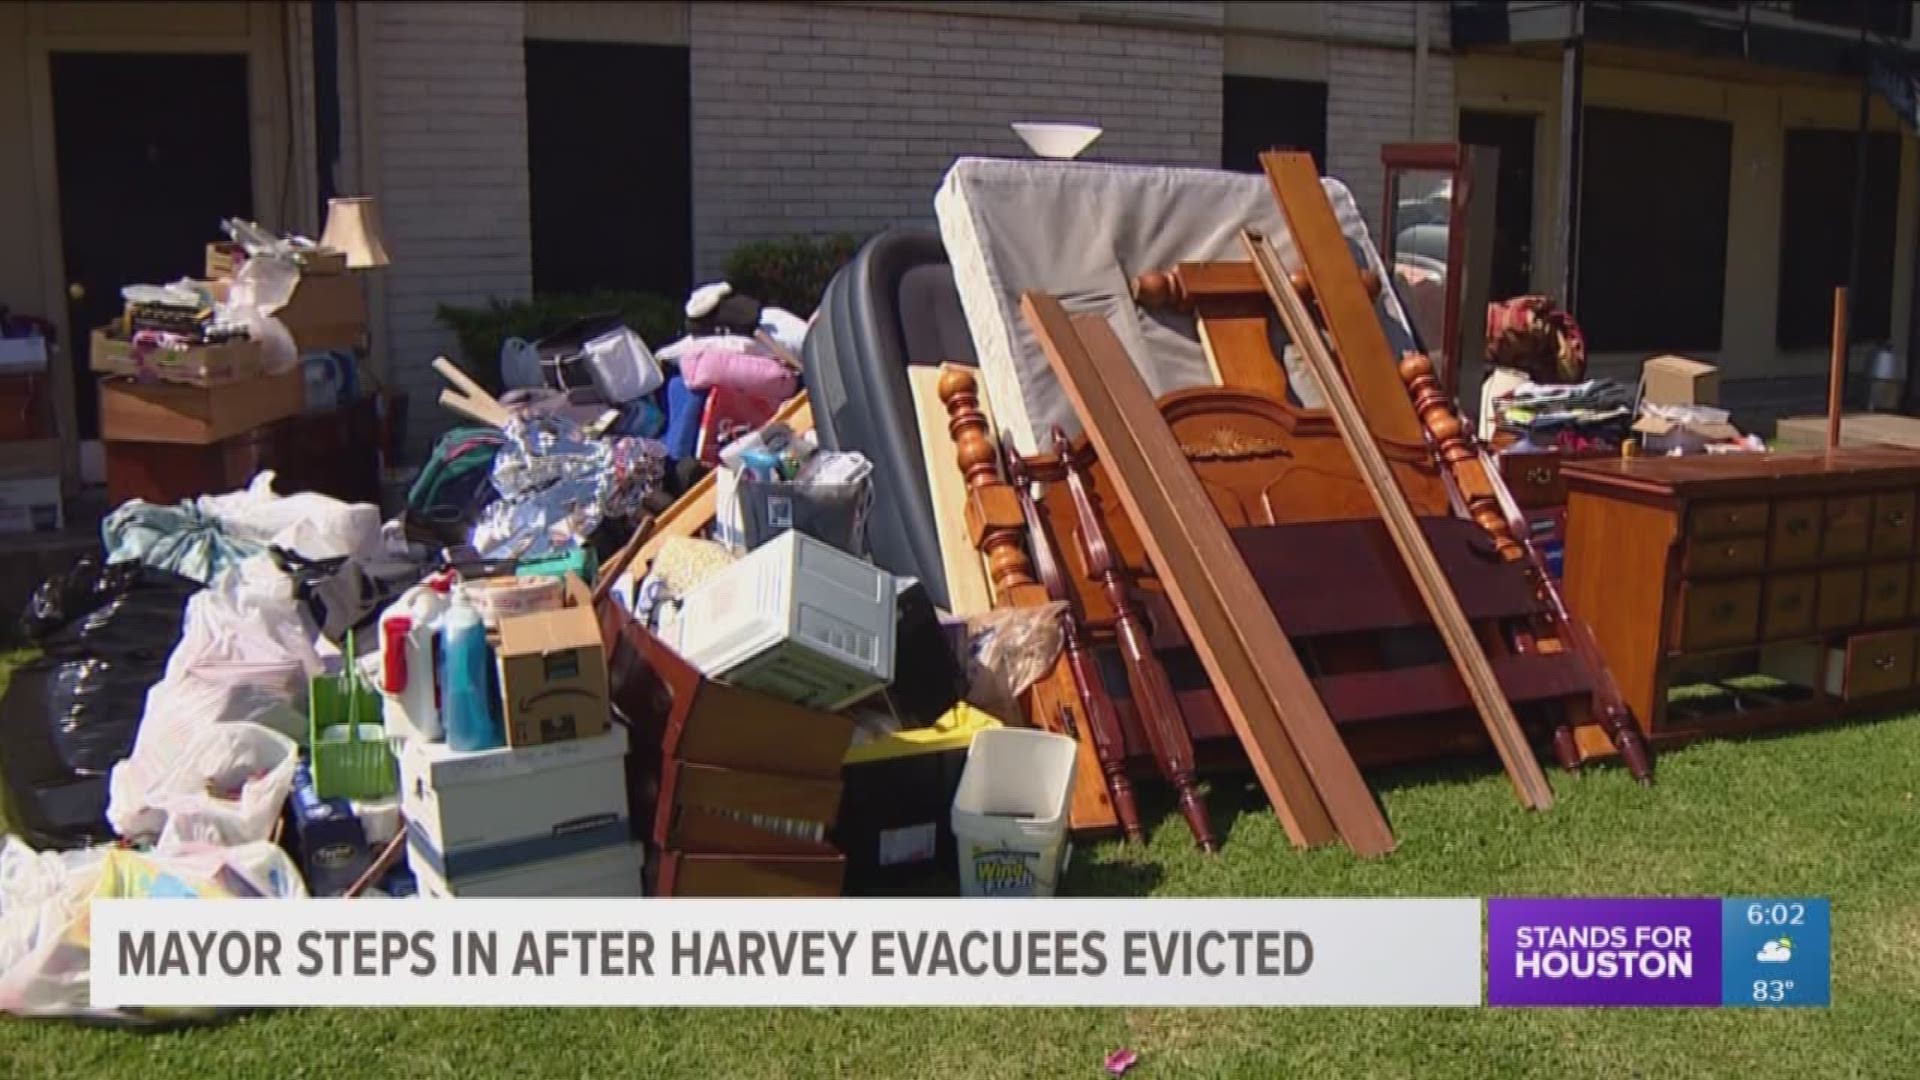 Dozens of Hurricane Harvey evacuees were evicted from apartments Wednesday where they were given temporary housing after the flood, however, just before 5 p.m. word came from Houston Mayor Sylvester Turner's office, telling residents to stay.